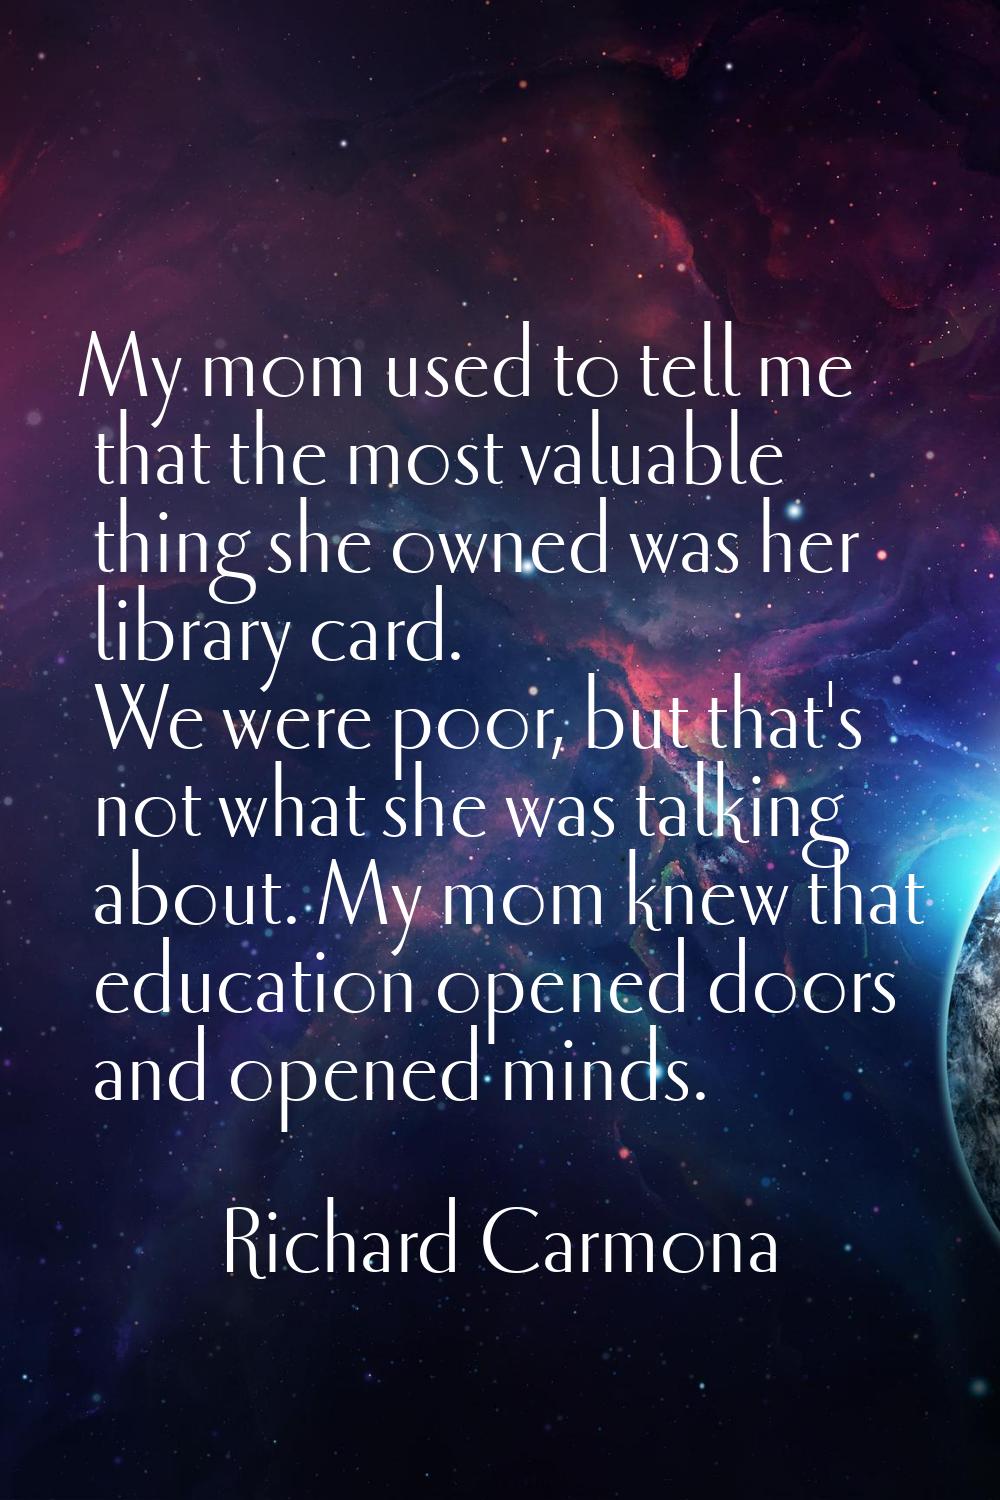 My mom used to tell me that the most valuable thing she owned was her library card. We were poor, b